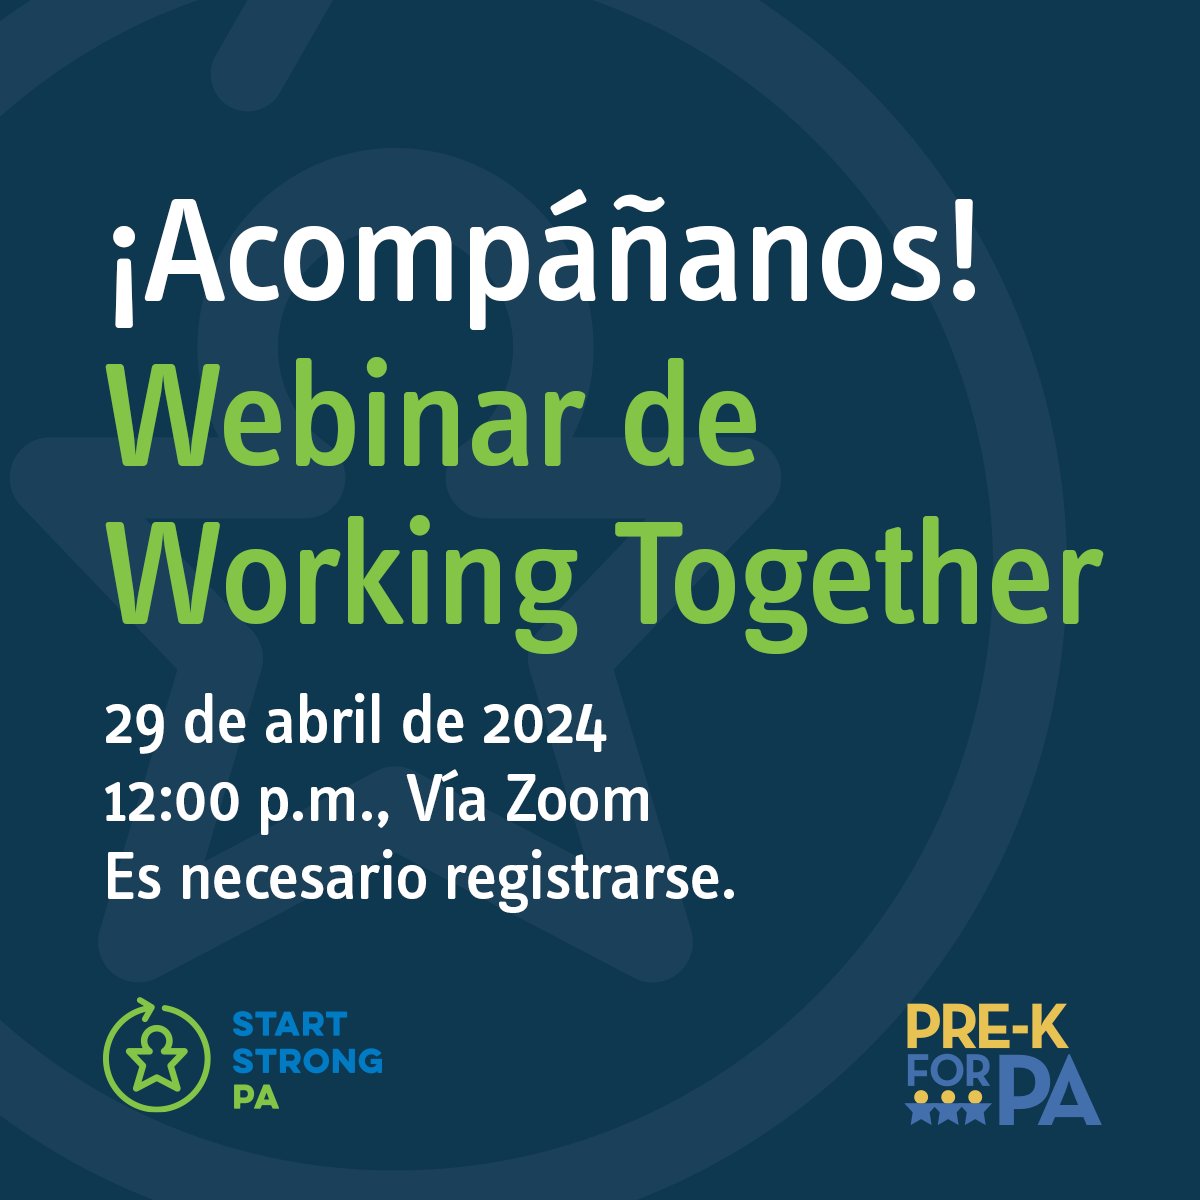 Register Today for the Working Together Webinar on Monday, 04/29! 👏 Register here: ow.ly/QI3f50RhvXw